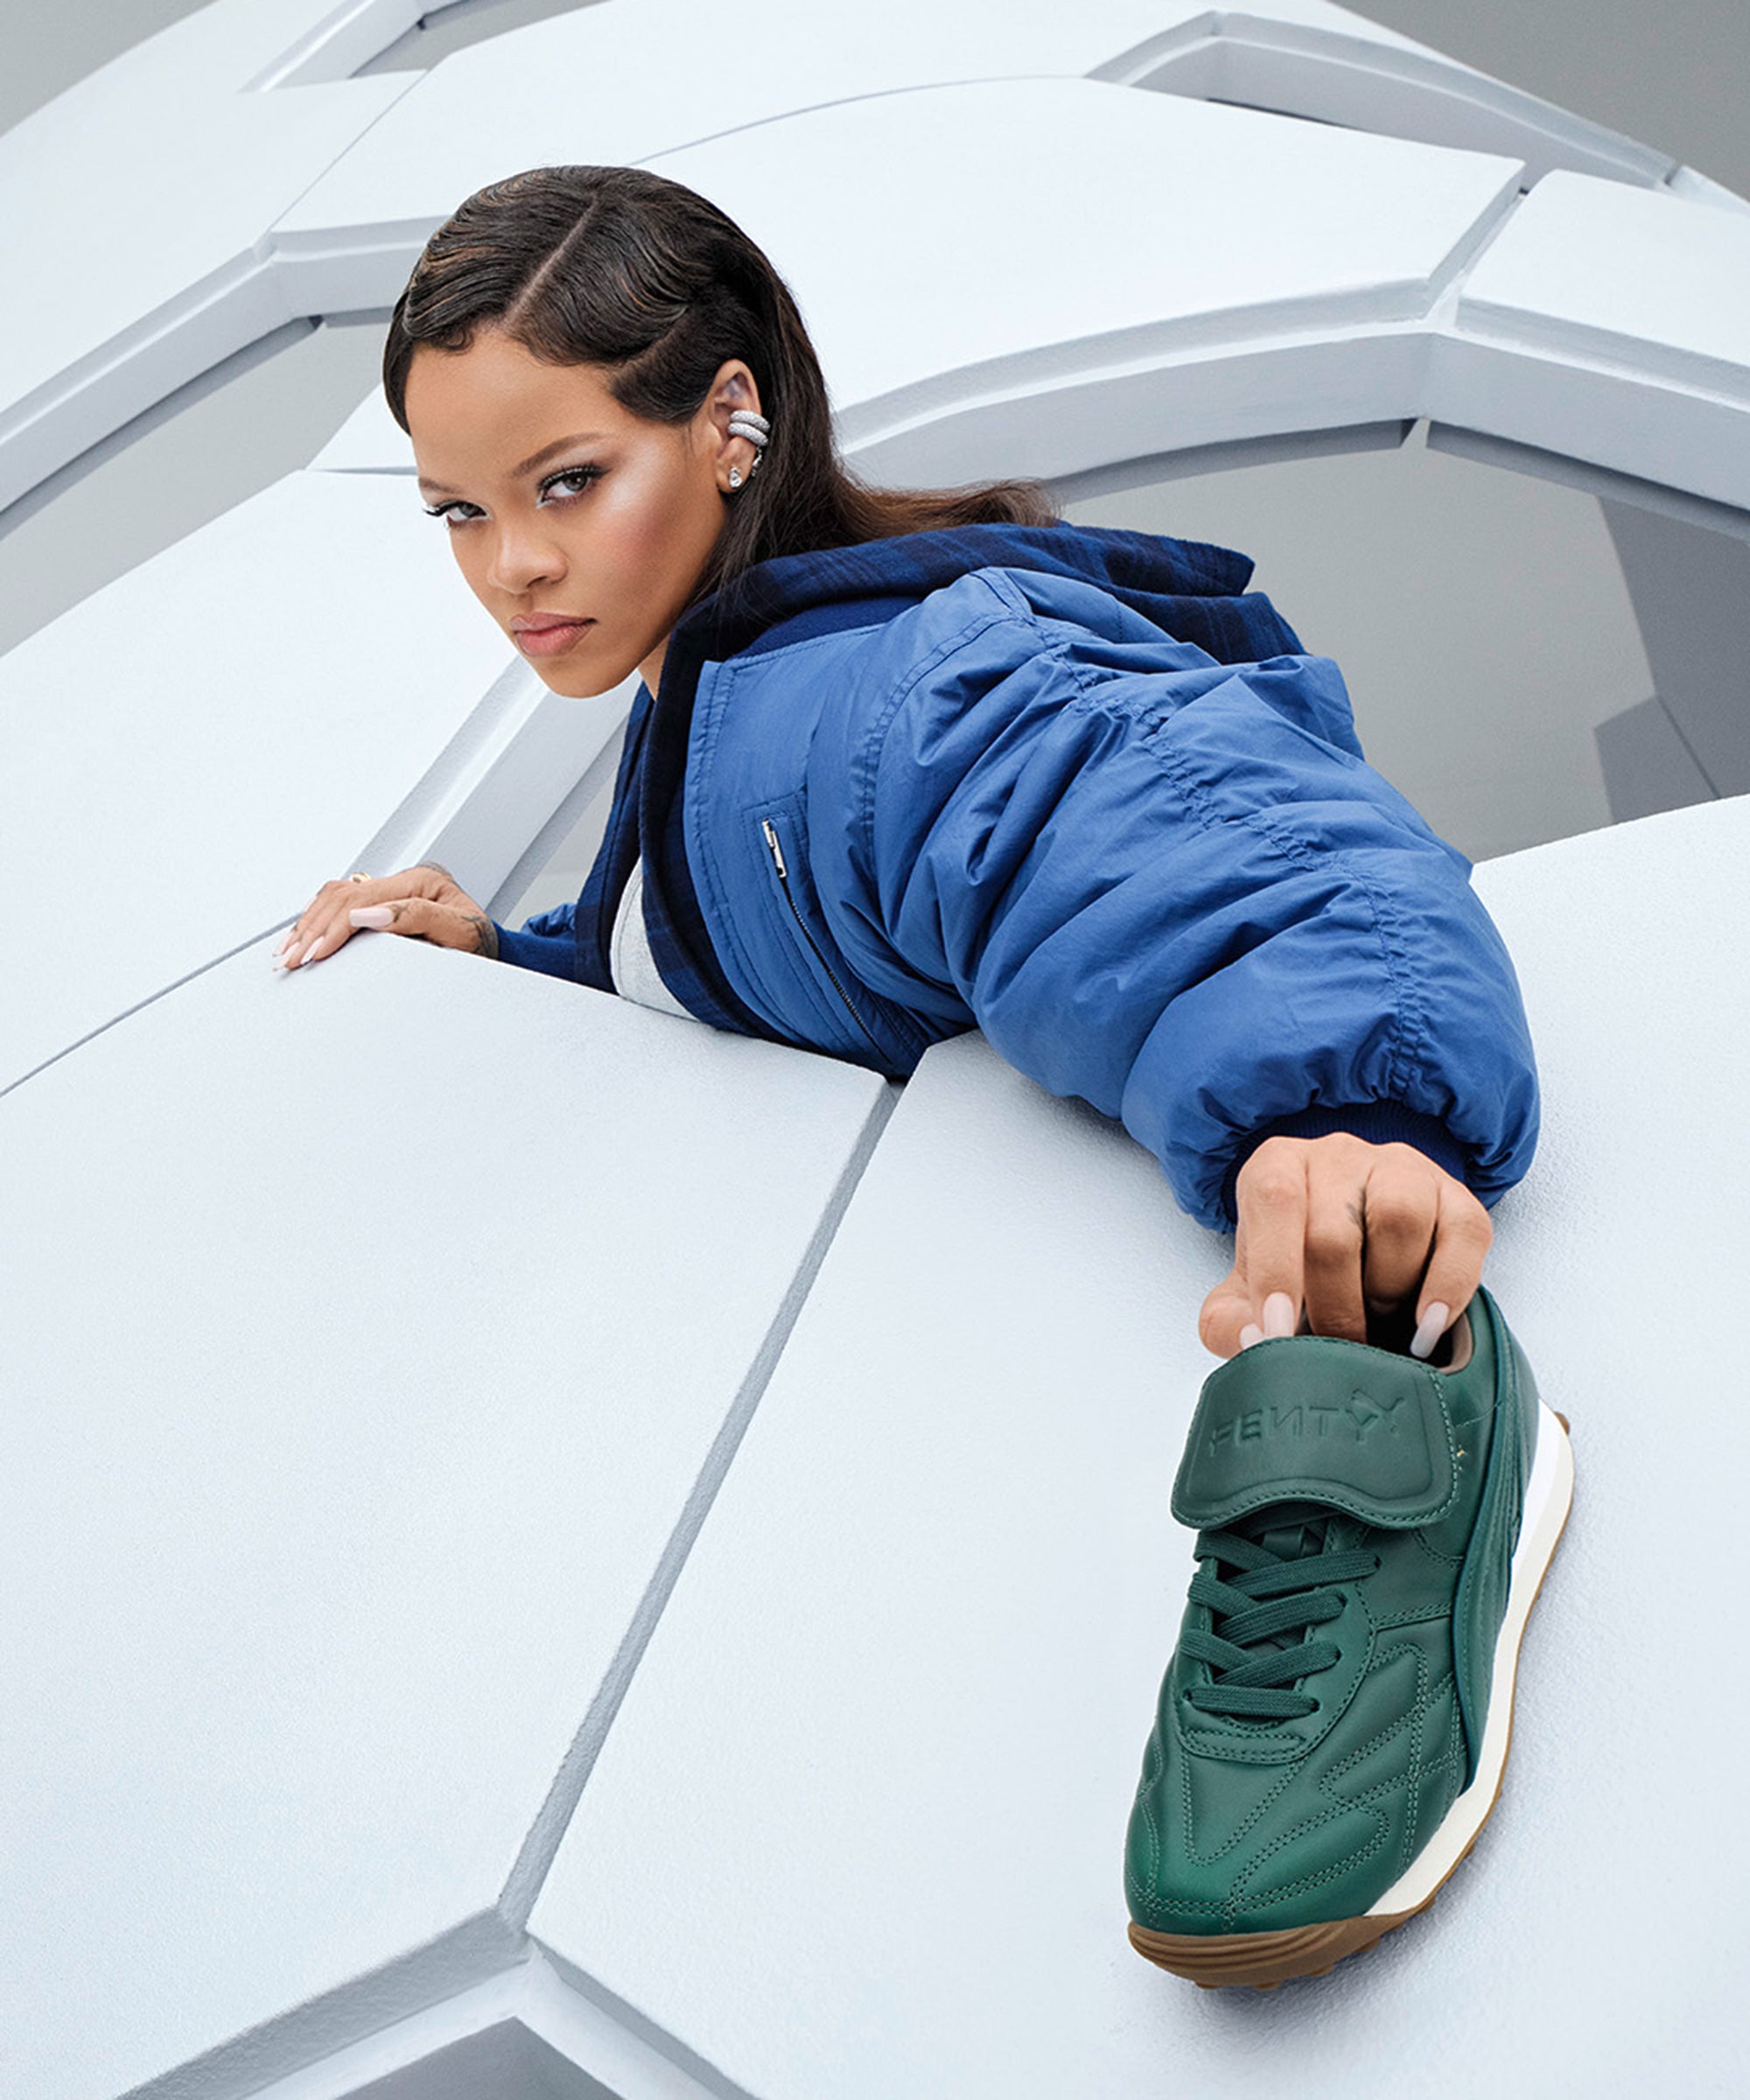 Fenty x Puma Is Back With Fall-Approved Sneakers